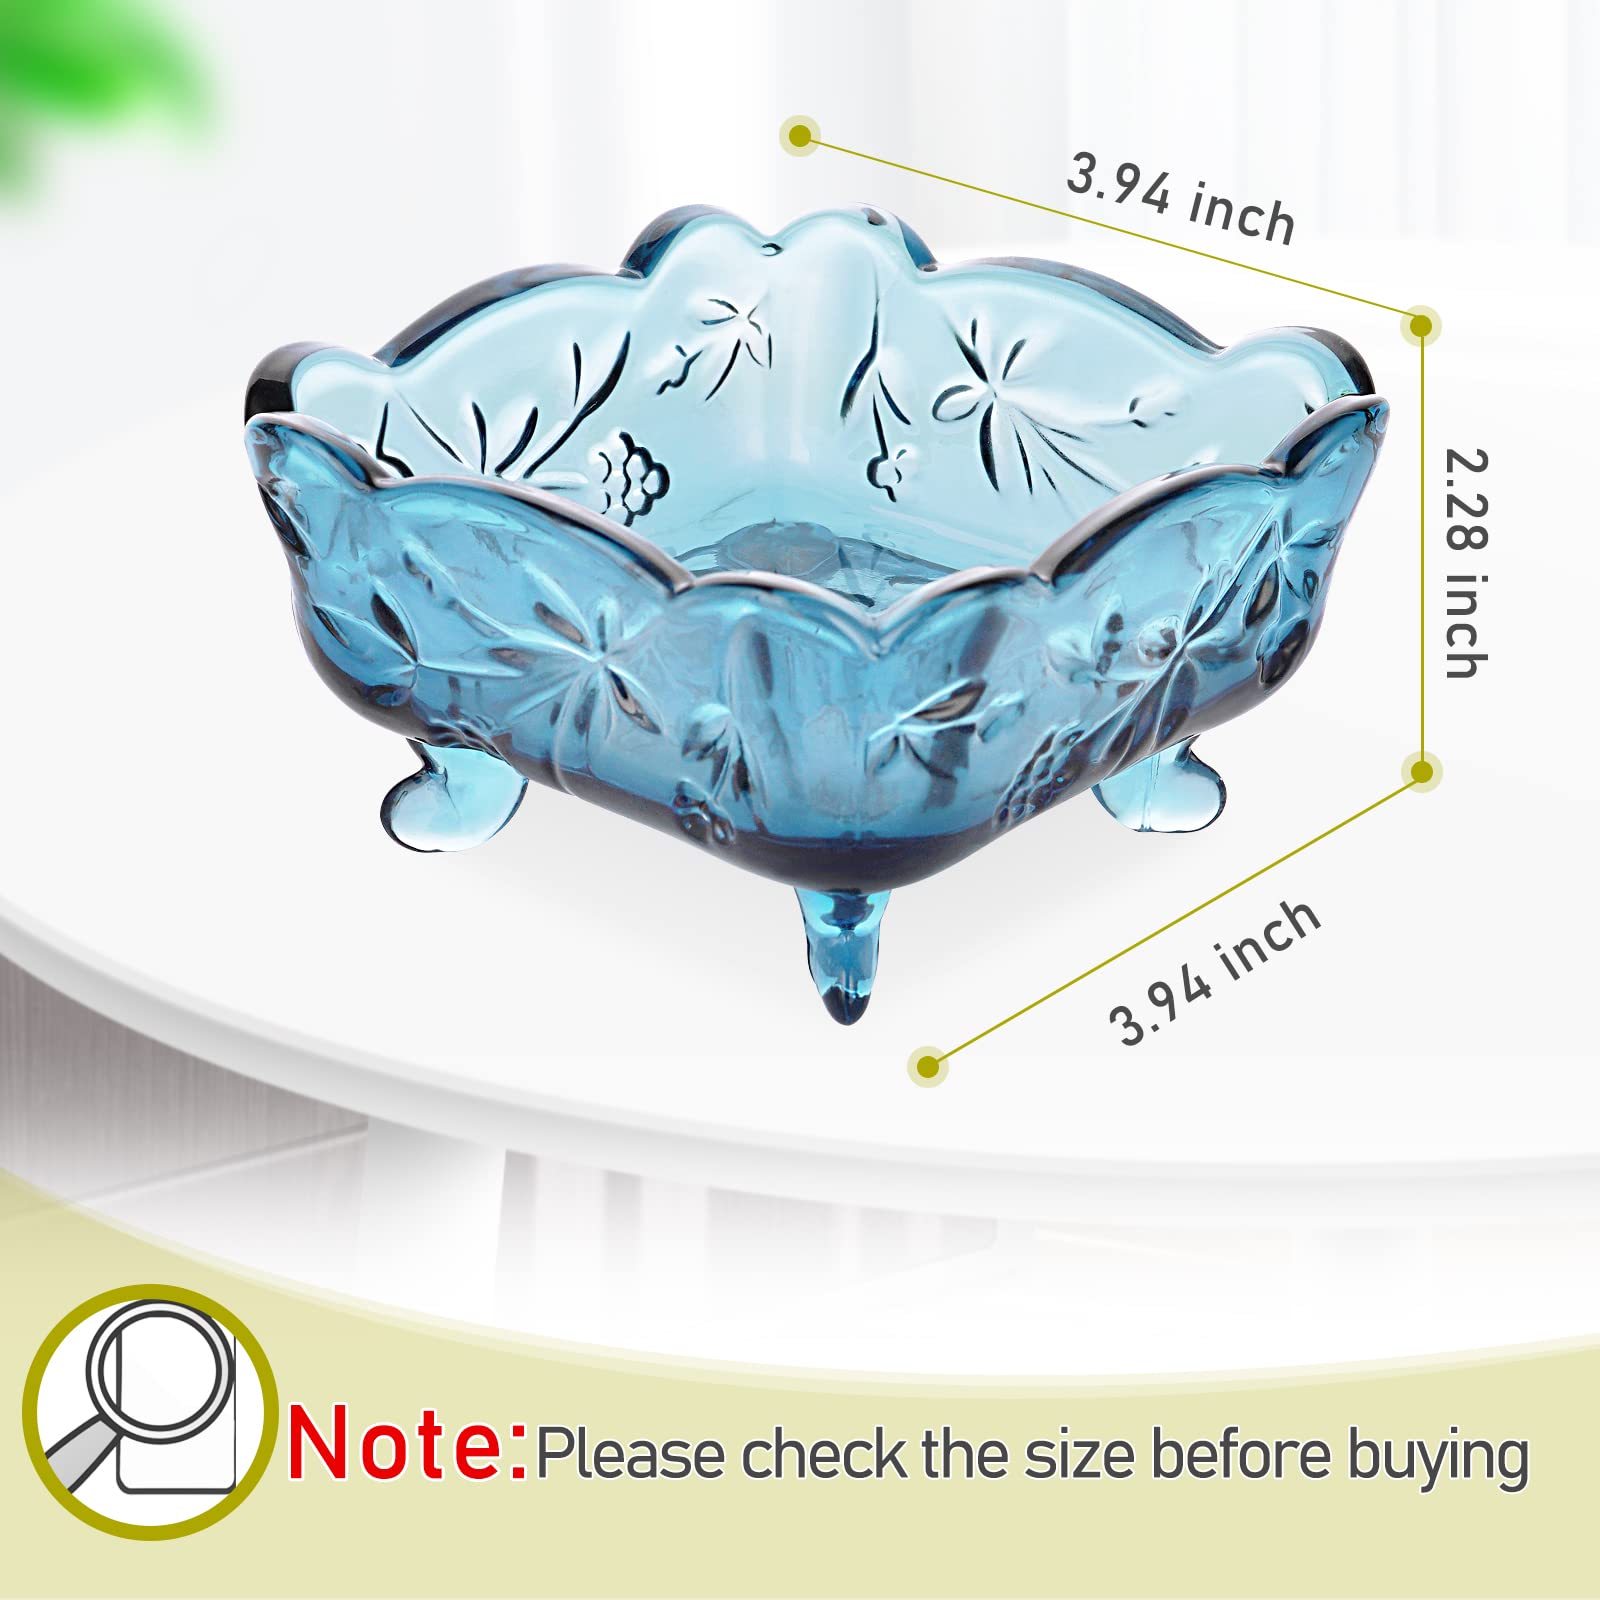 Fivtyily Retro Carved Square Glass Fruit/Sugar/Candy Dish Tray Ice Cream Bowl with Antislip Legs (Blue)